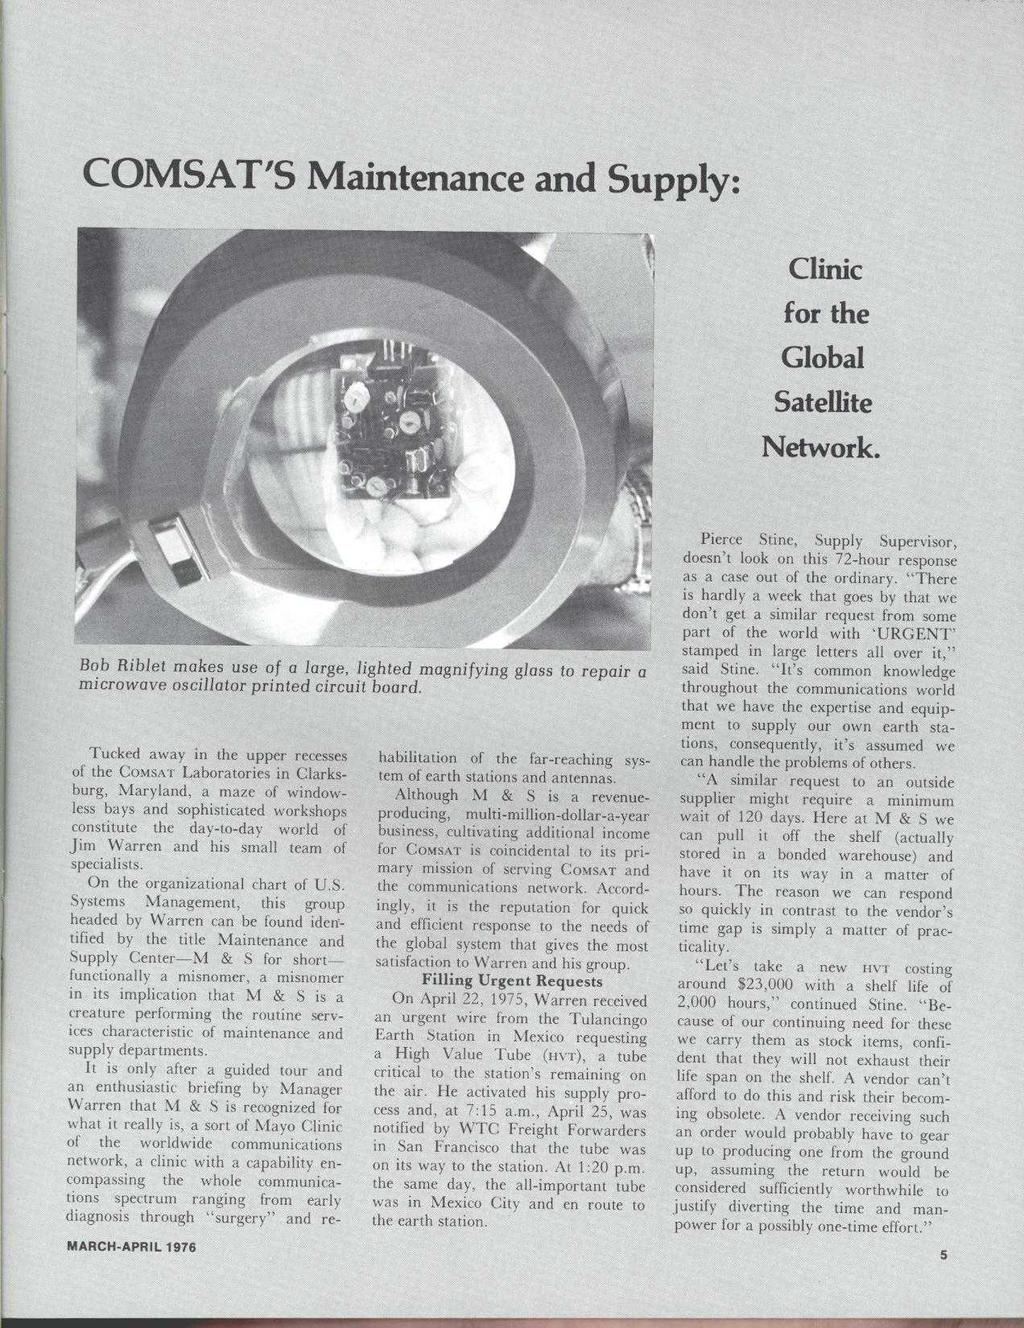 COMSAT'S Maintenance and Supply: Clinic for the Global Satellite Network. Bob Rihlet makes use of a large, lighted magnifying glass to repair a microwave oscillator printed circuit hoard.